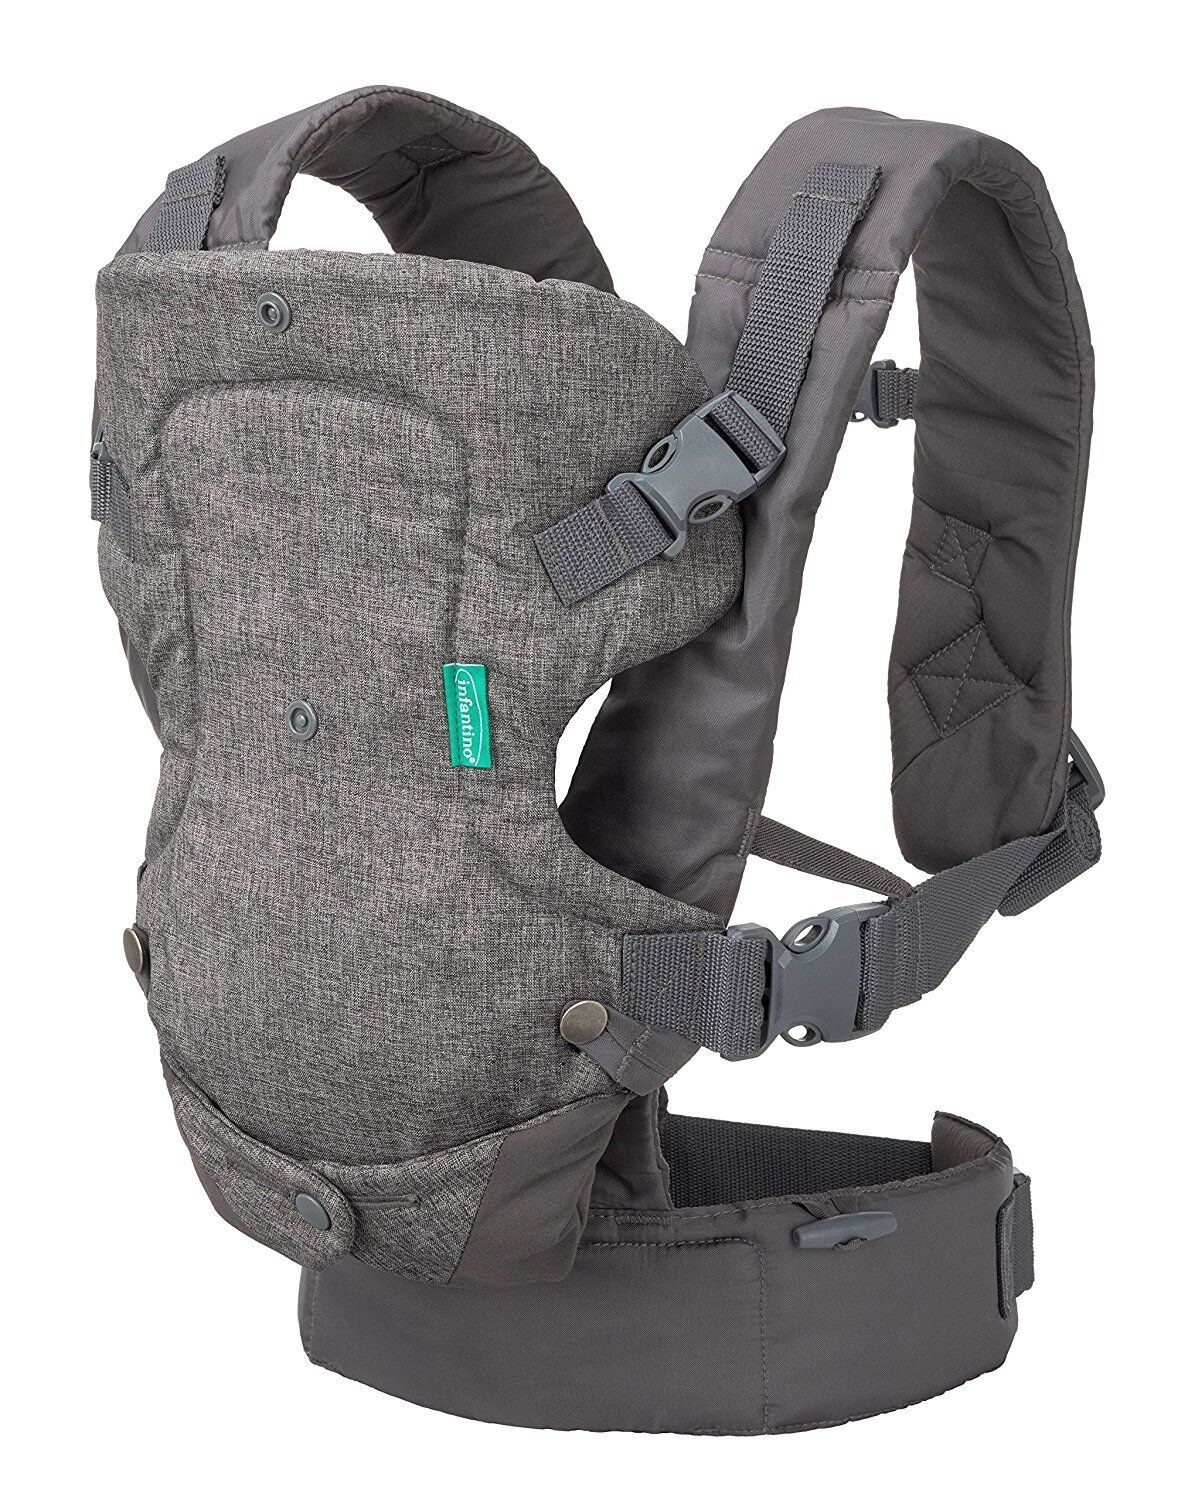 Infantino Flip Advanced 4-in-1 Convertible Carrier, Light Grey Infantino 200-183